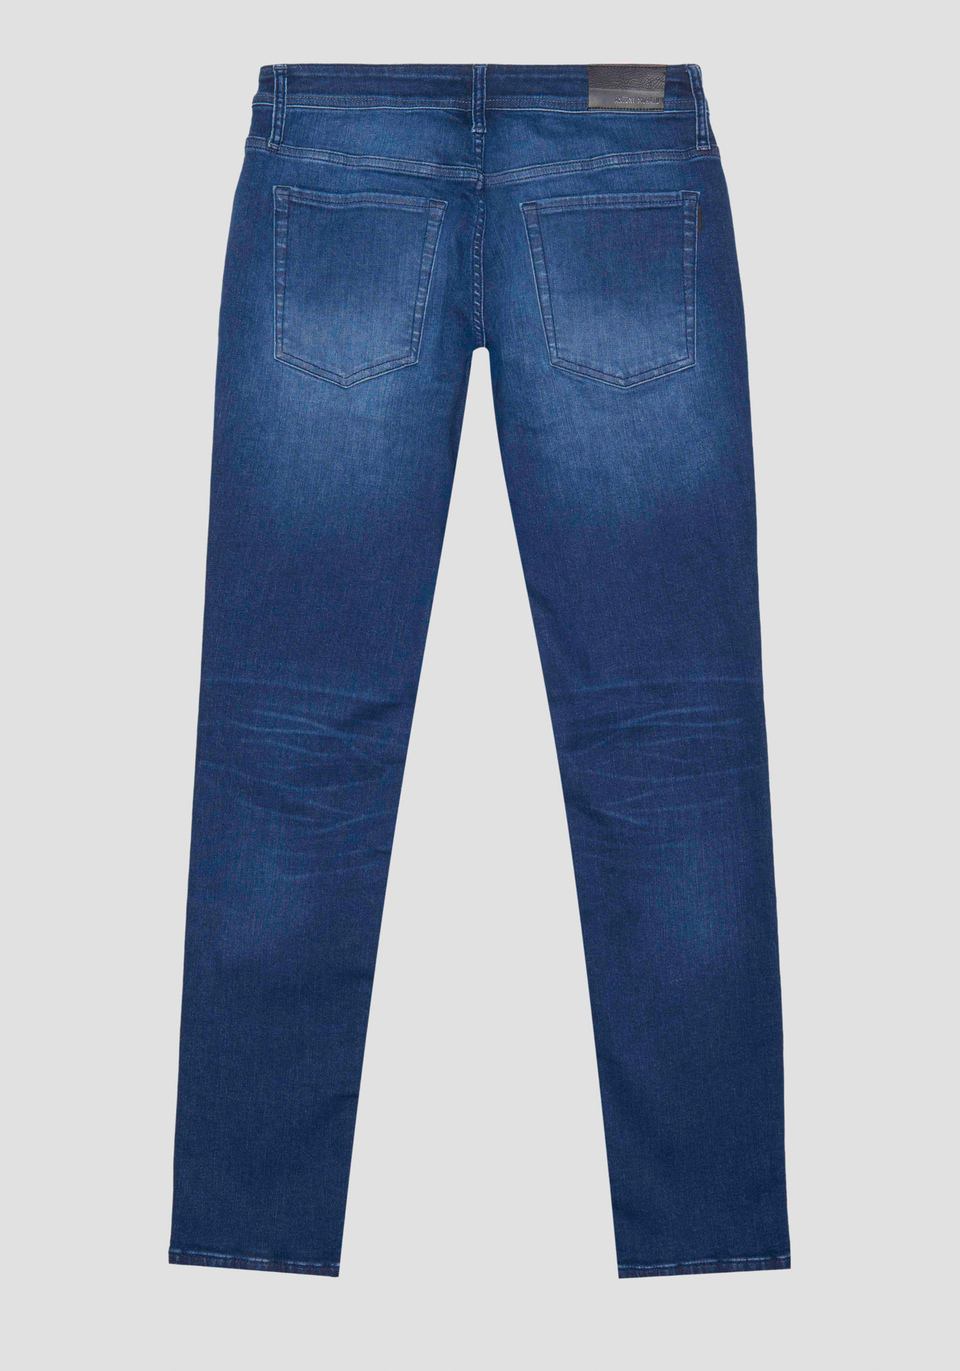 JEANS OZZY TAPERED FIT IN MID BLUE POWER STRETCH DENIM - Antony Morato Online Shop